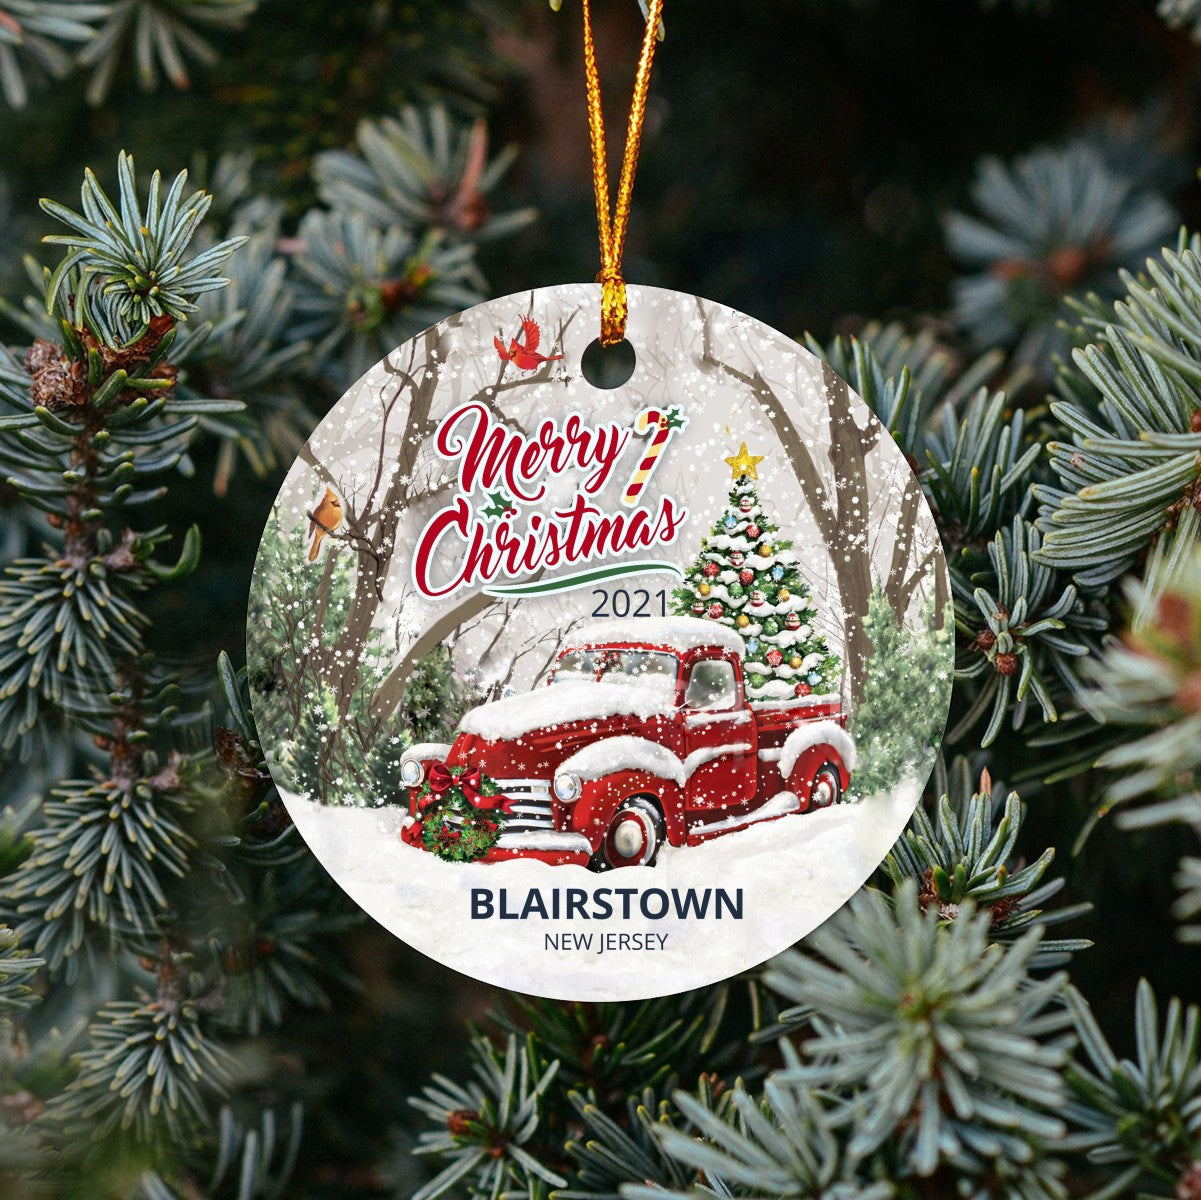 Christmas Tree Ornaments Blairstown - Ornament With Name City, State Blairstown New Jersey NJ Ornament - Red Truck Xmas Ornaments 3'' Plastic Gift For Family, Friend And Housewarming